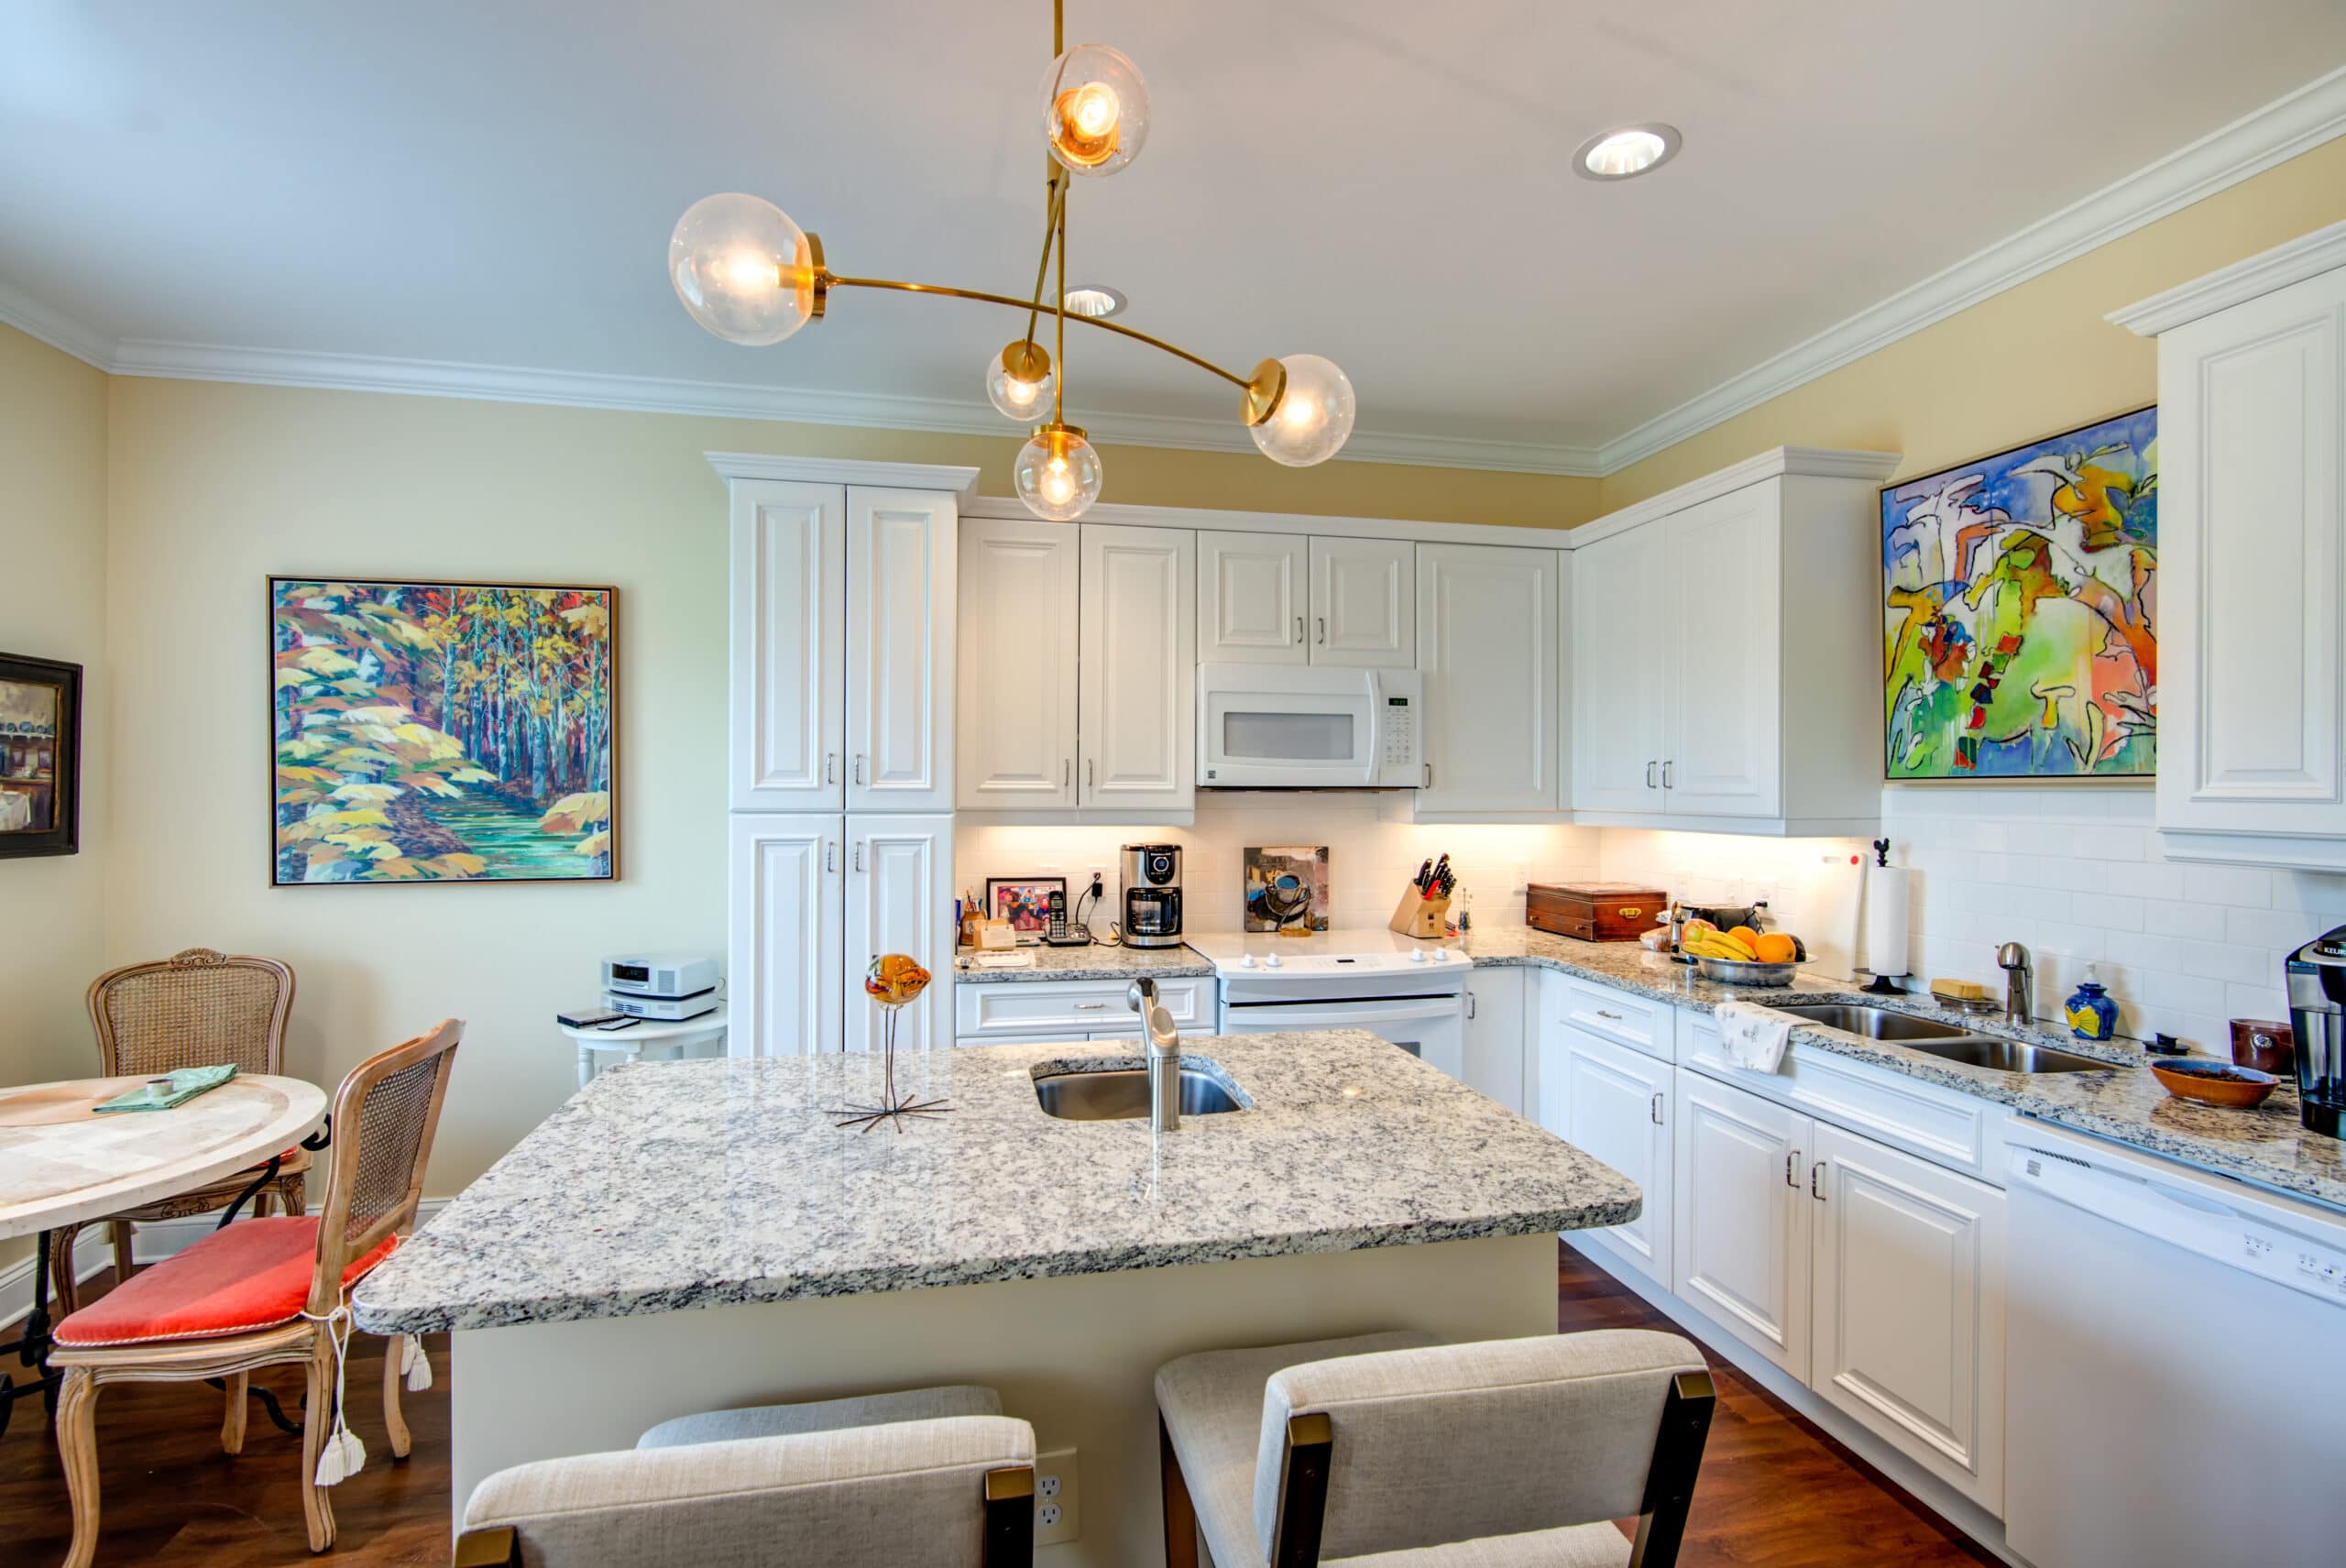 Interior of an independent living kitchen featuring hardwood floors, white cabinets and marble countertops.